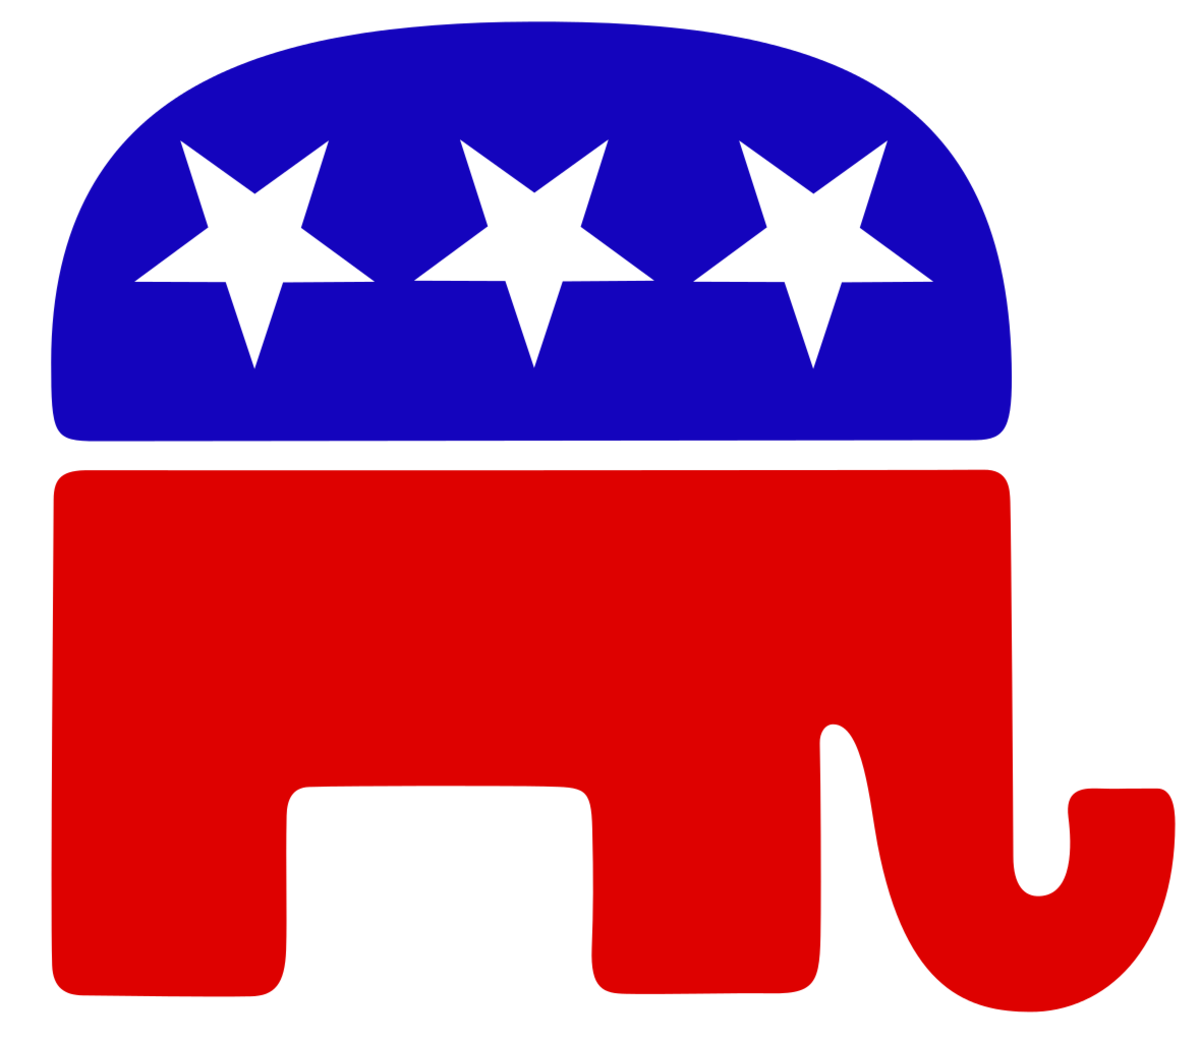 What Do Republicans Believe? 16 Things a Republican Stands For